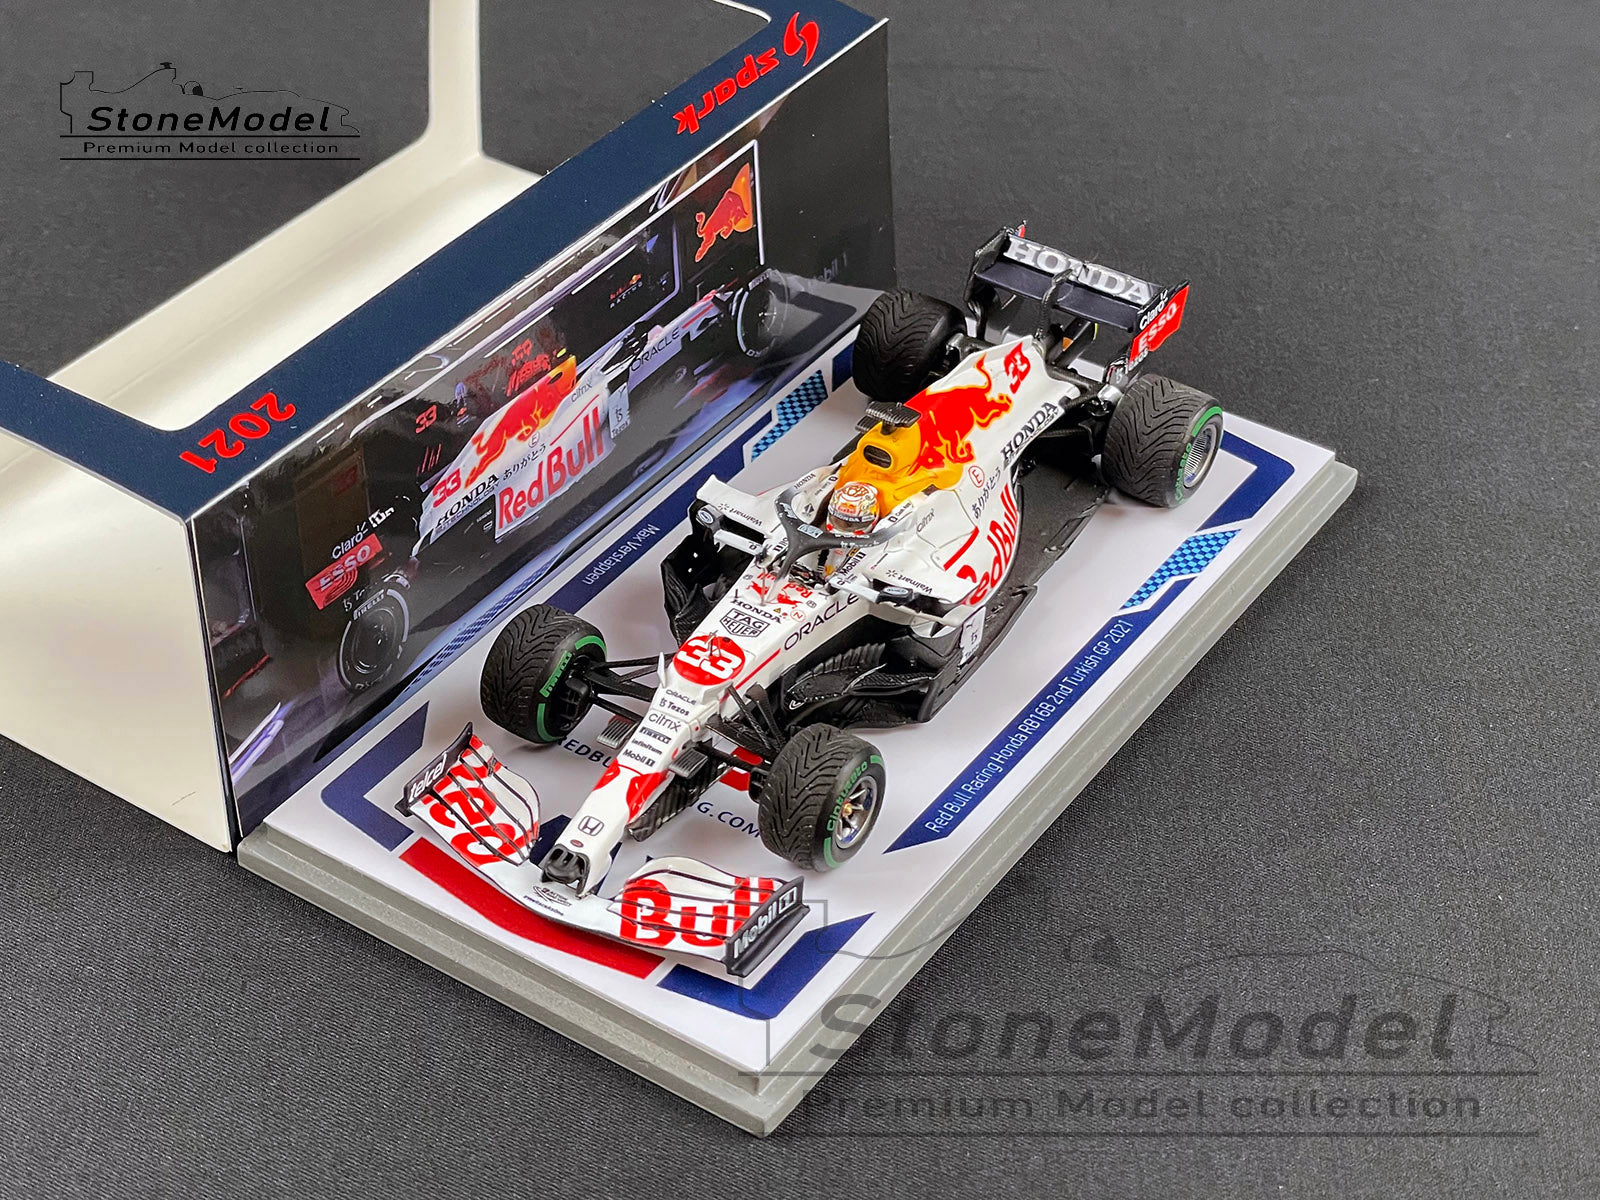 Official Red Bull Racing 2021 Max Verstappen World Champion T